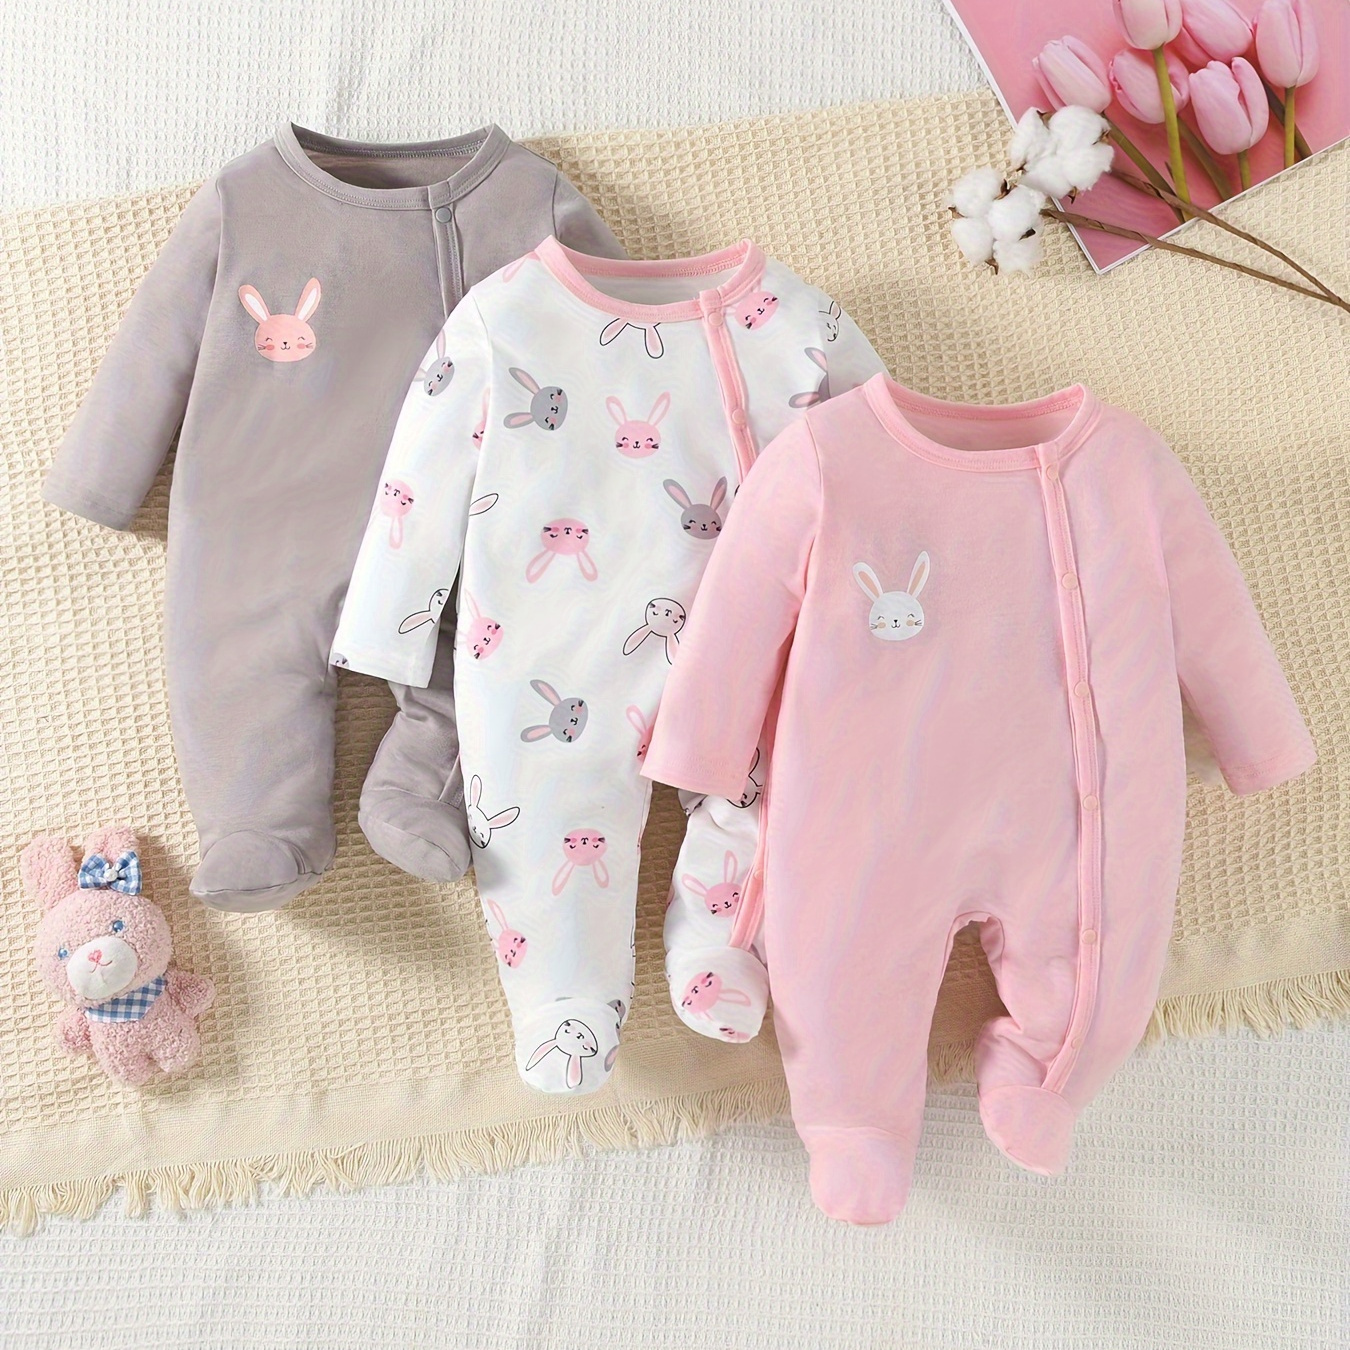 

3pcs Baby's Cartoon Bunny Print Zip Up Footed Bodysuit, Casual Long Sleeve Romper, Toddler & Infant Girl's Onesie For Spring Fall, As Gift